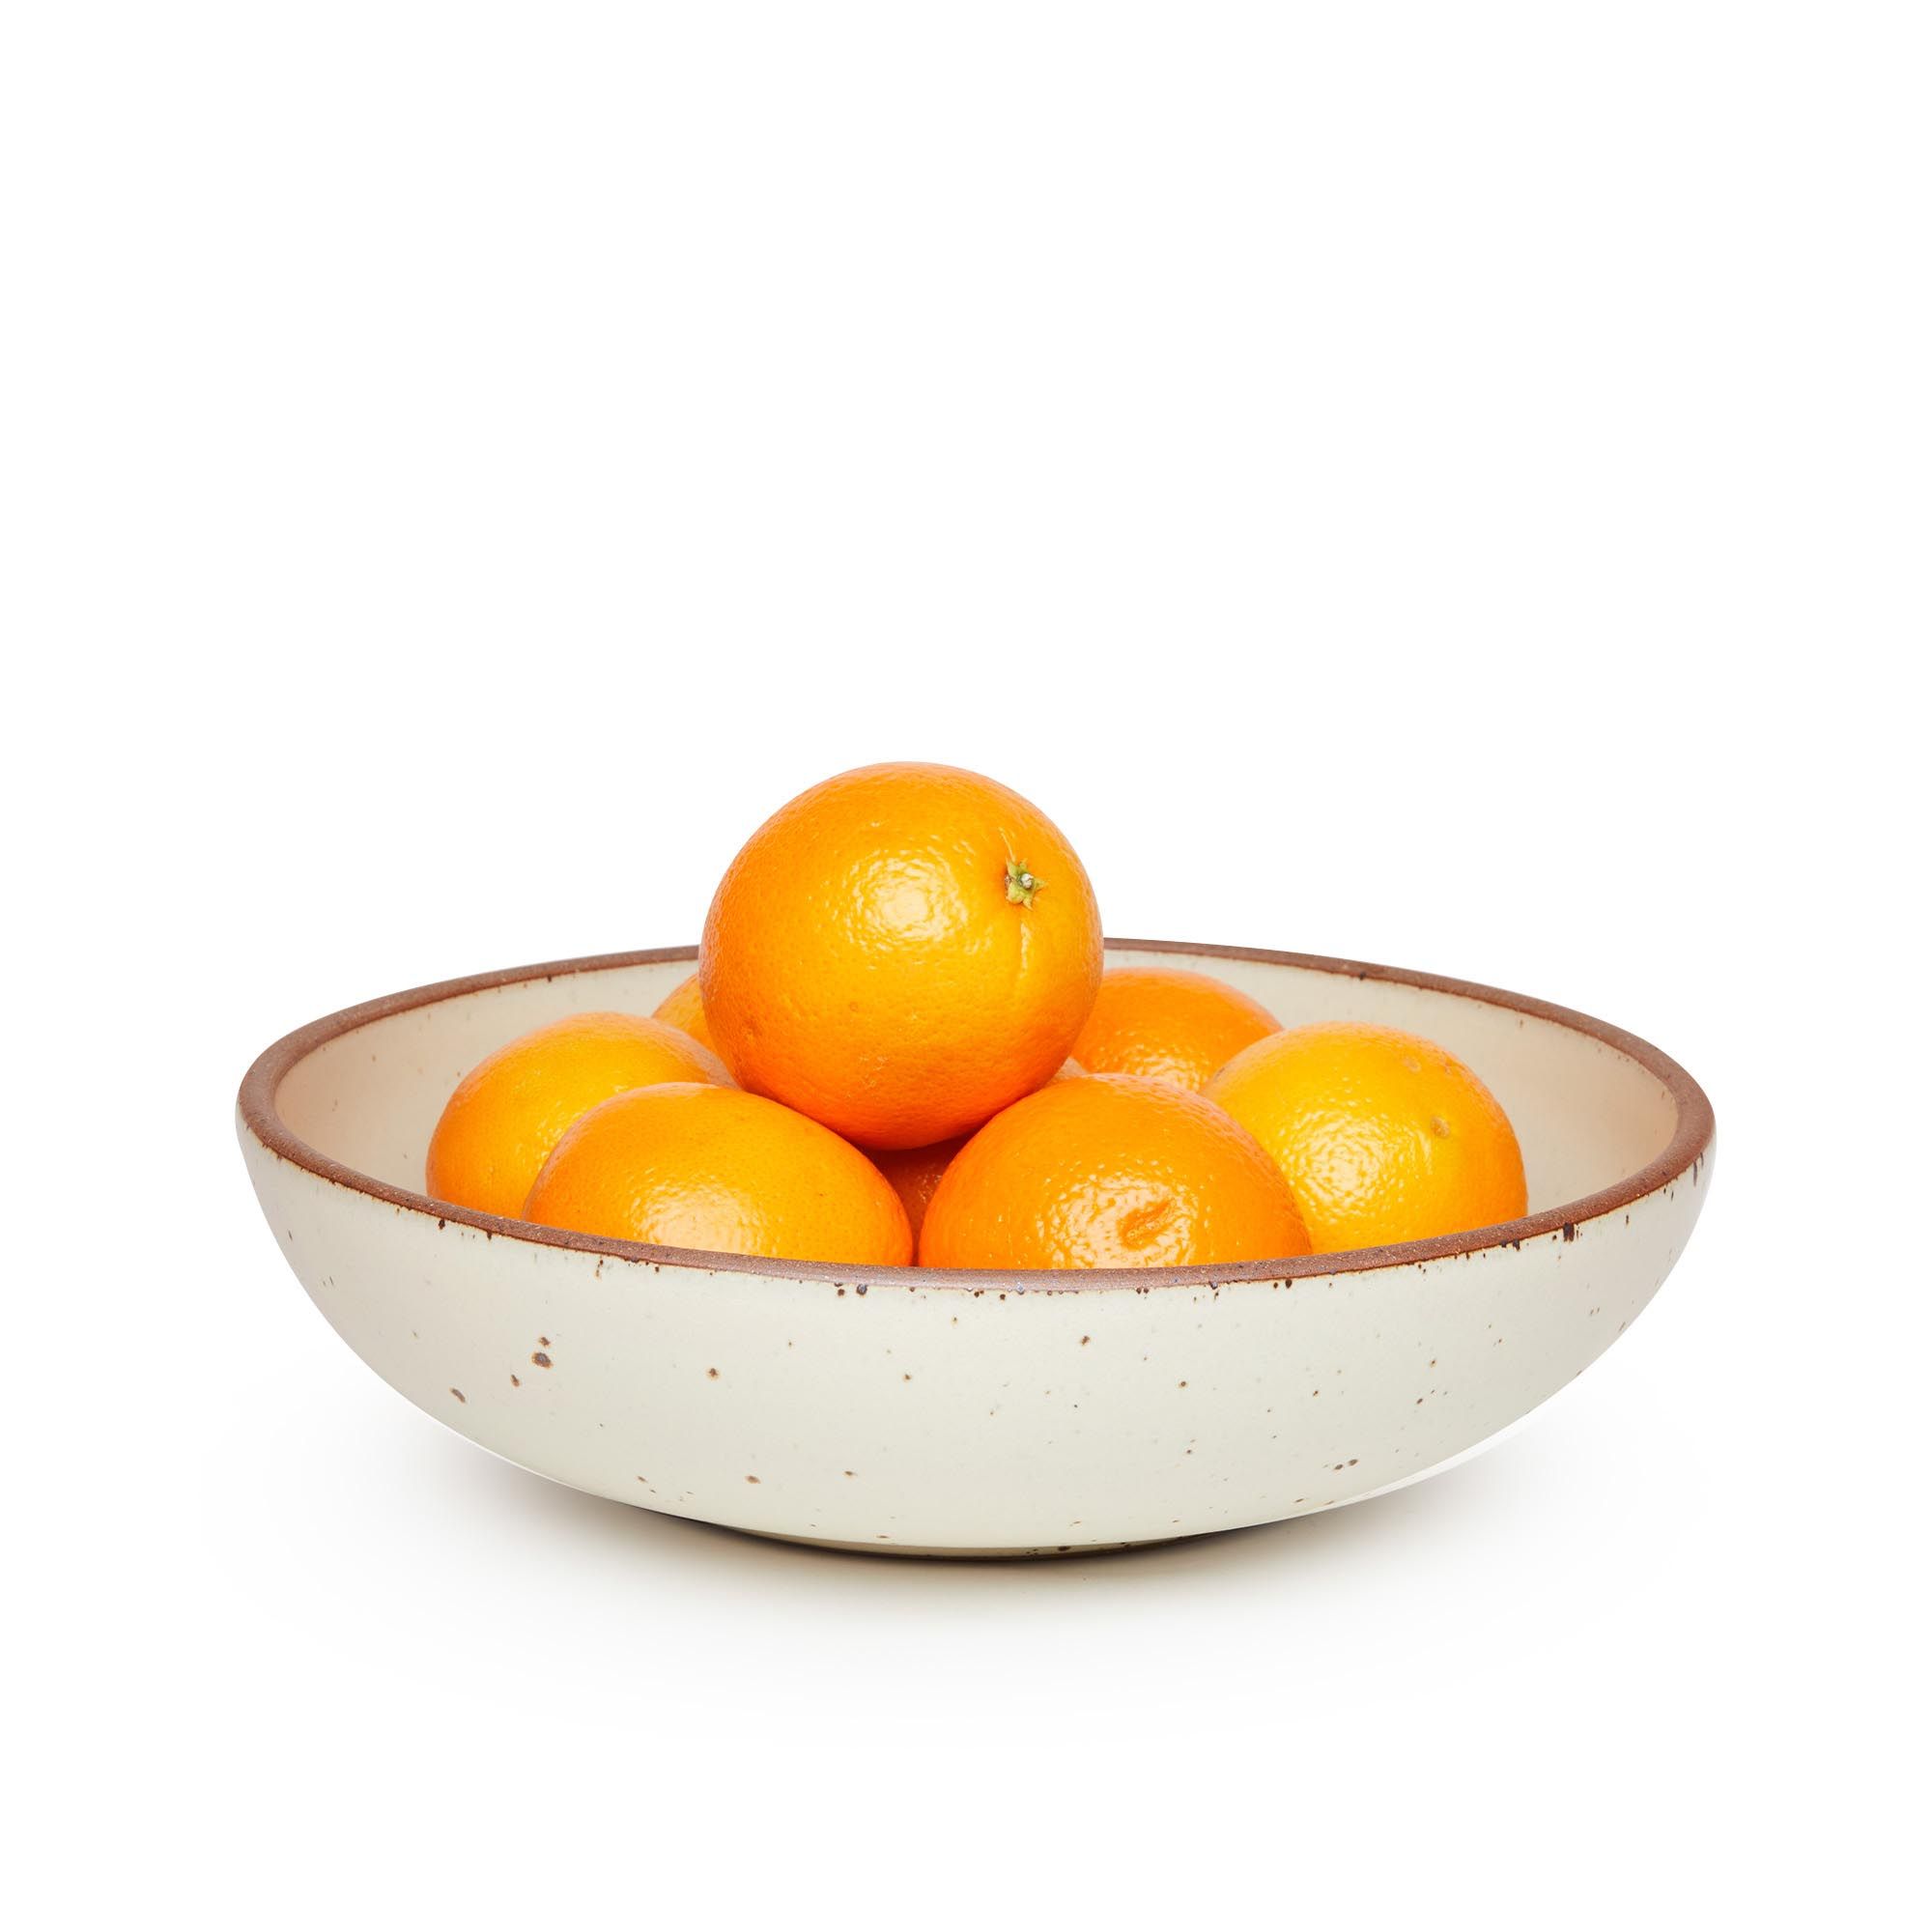 A large shallow serving ceramic bowl in a warm, tan-toned, off-white color featuring iron speckles and an unglazed rim, filled with oranges